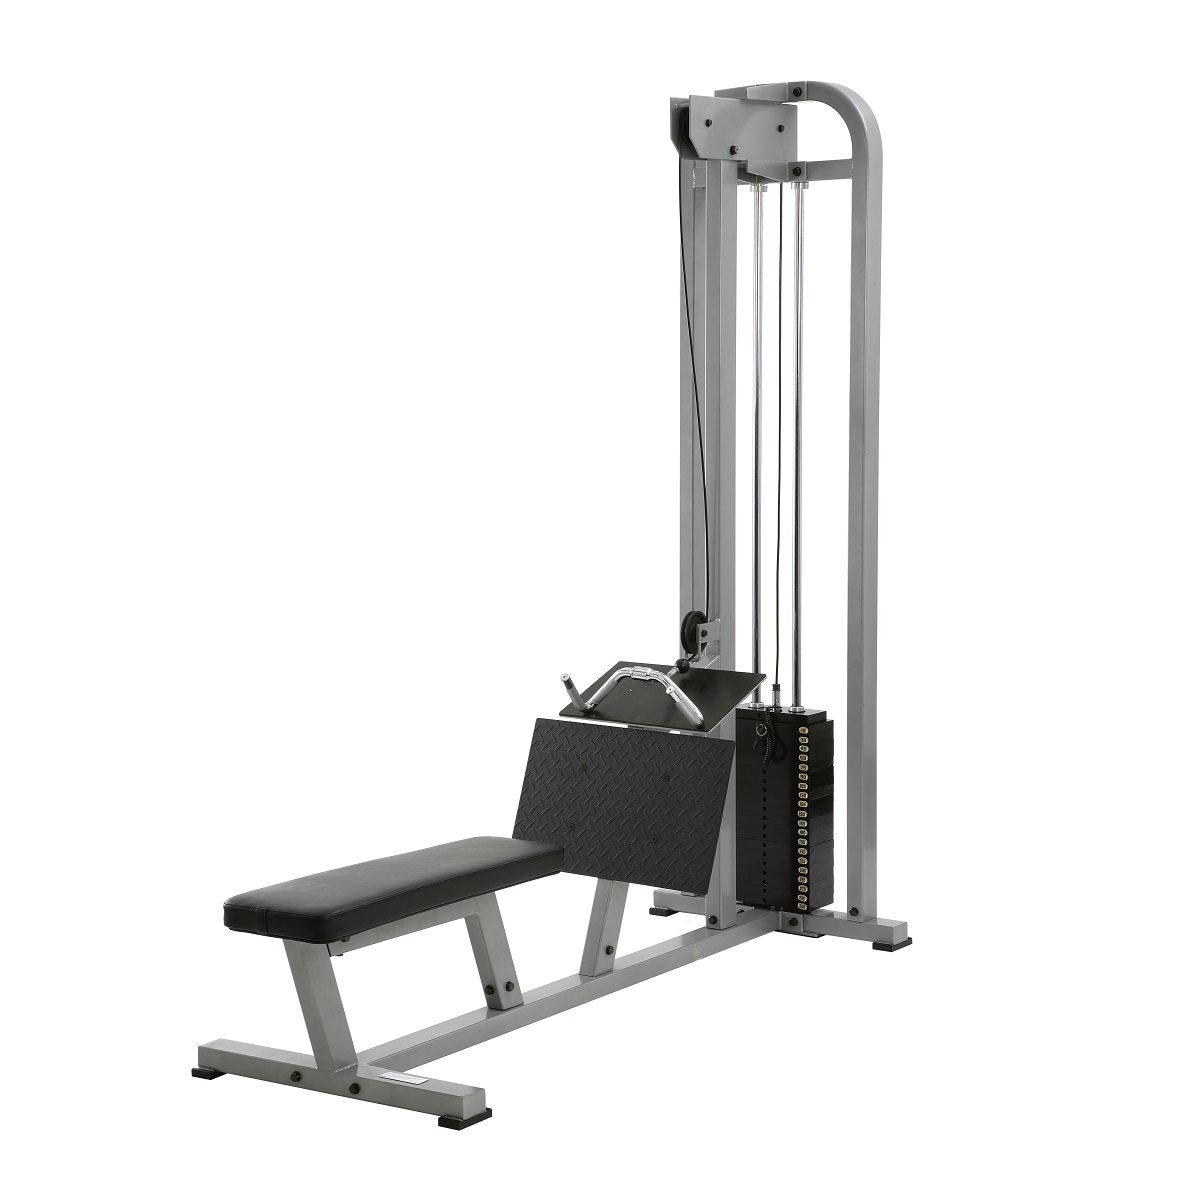 Low Seated Row Machine, Commercial Gym Equipment